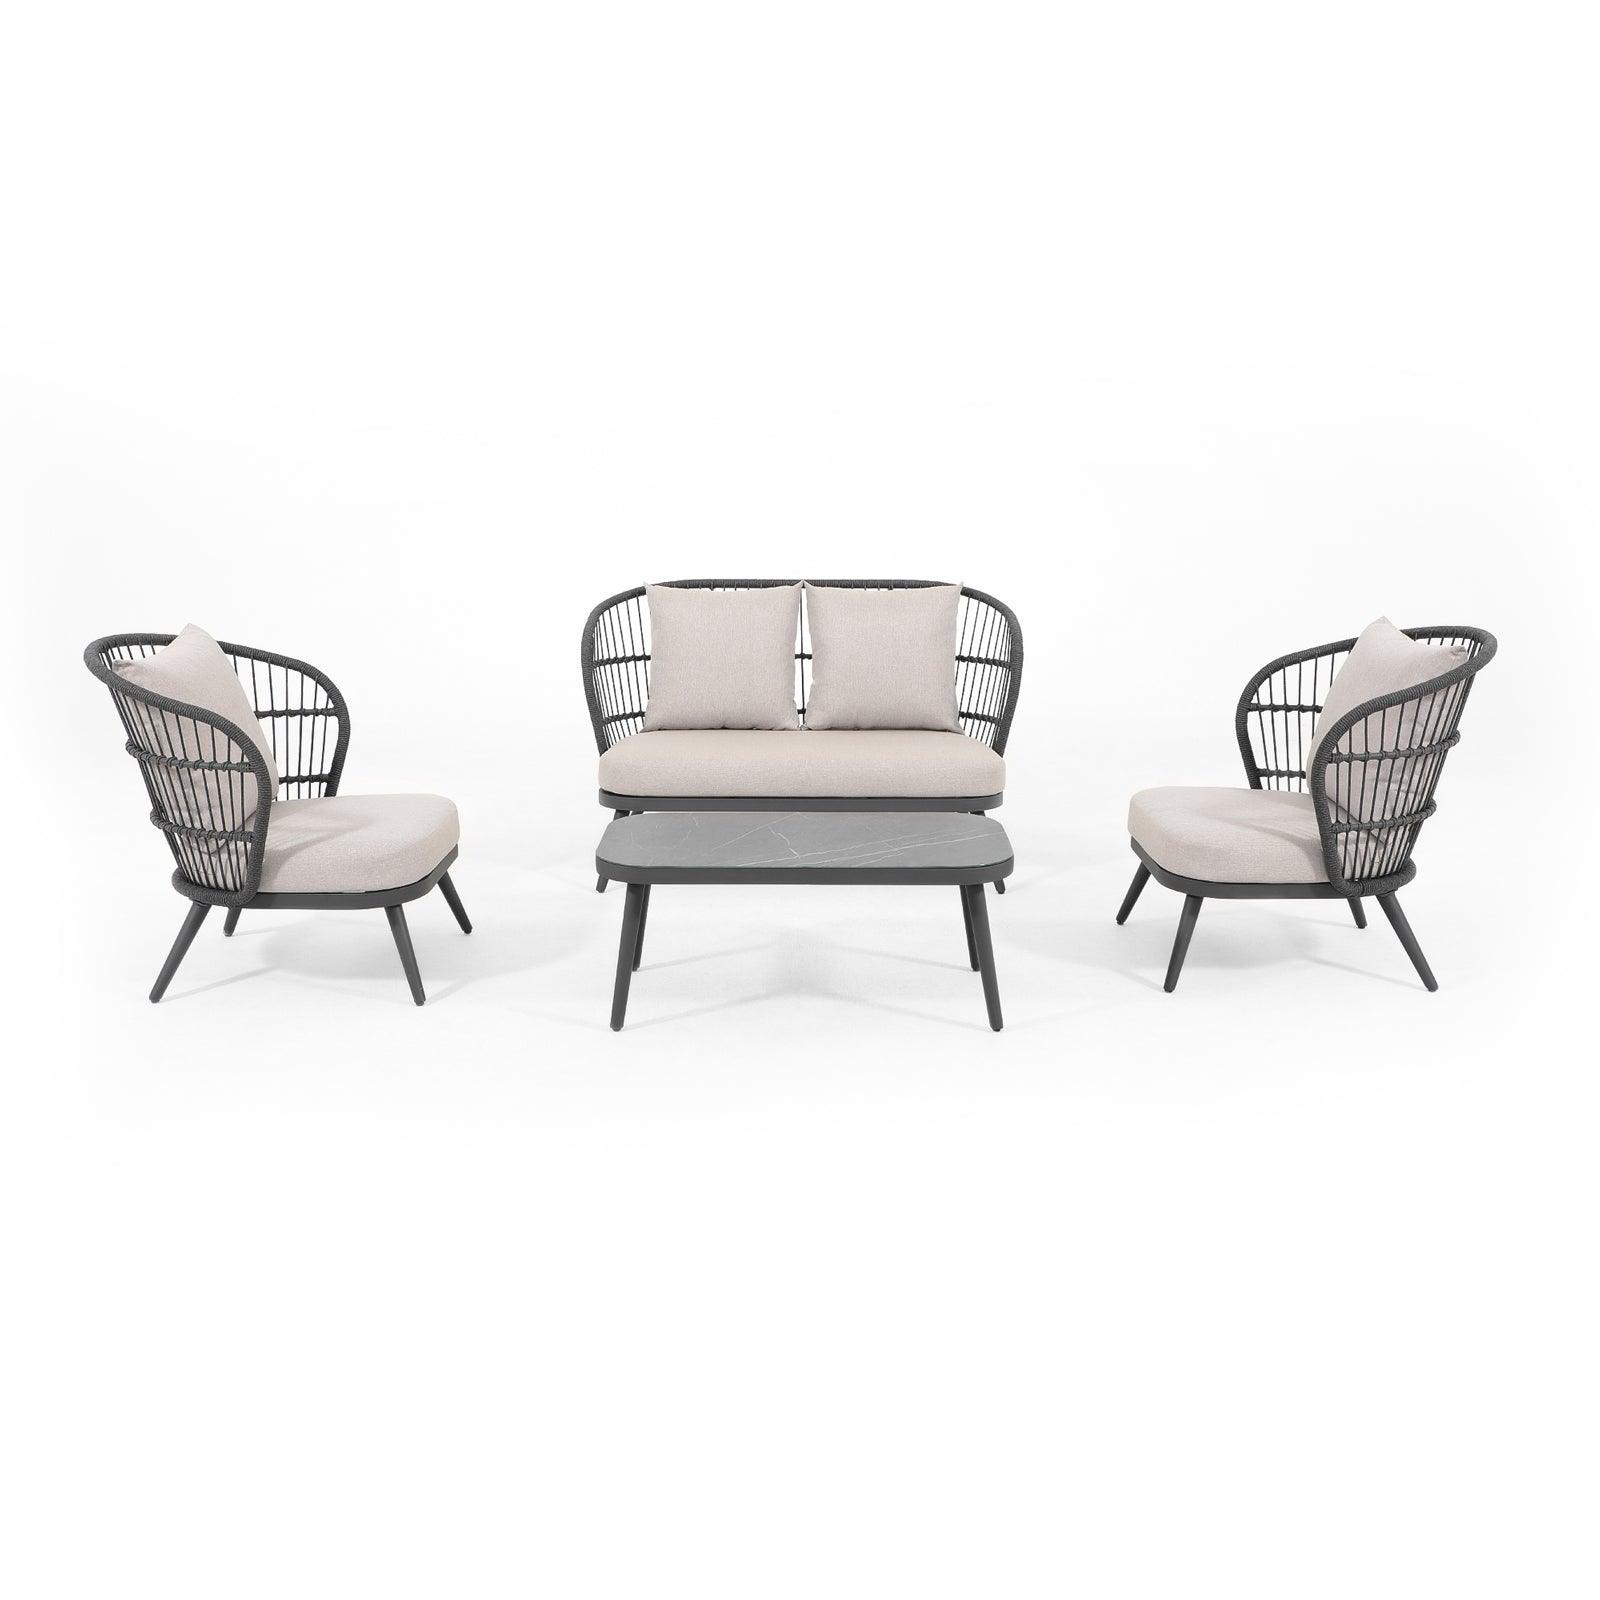 Comino Modern Rope Outdoor Furniture, 4-Piece dark grey Sofa Set with aluminum frame and backrest rope design and light grey cushions, including a loveseat, 2 armchairs, 1 coffee table - Jardina Furniture